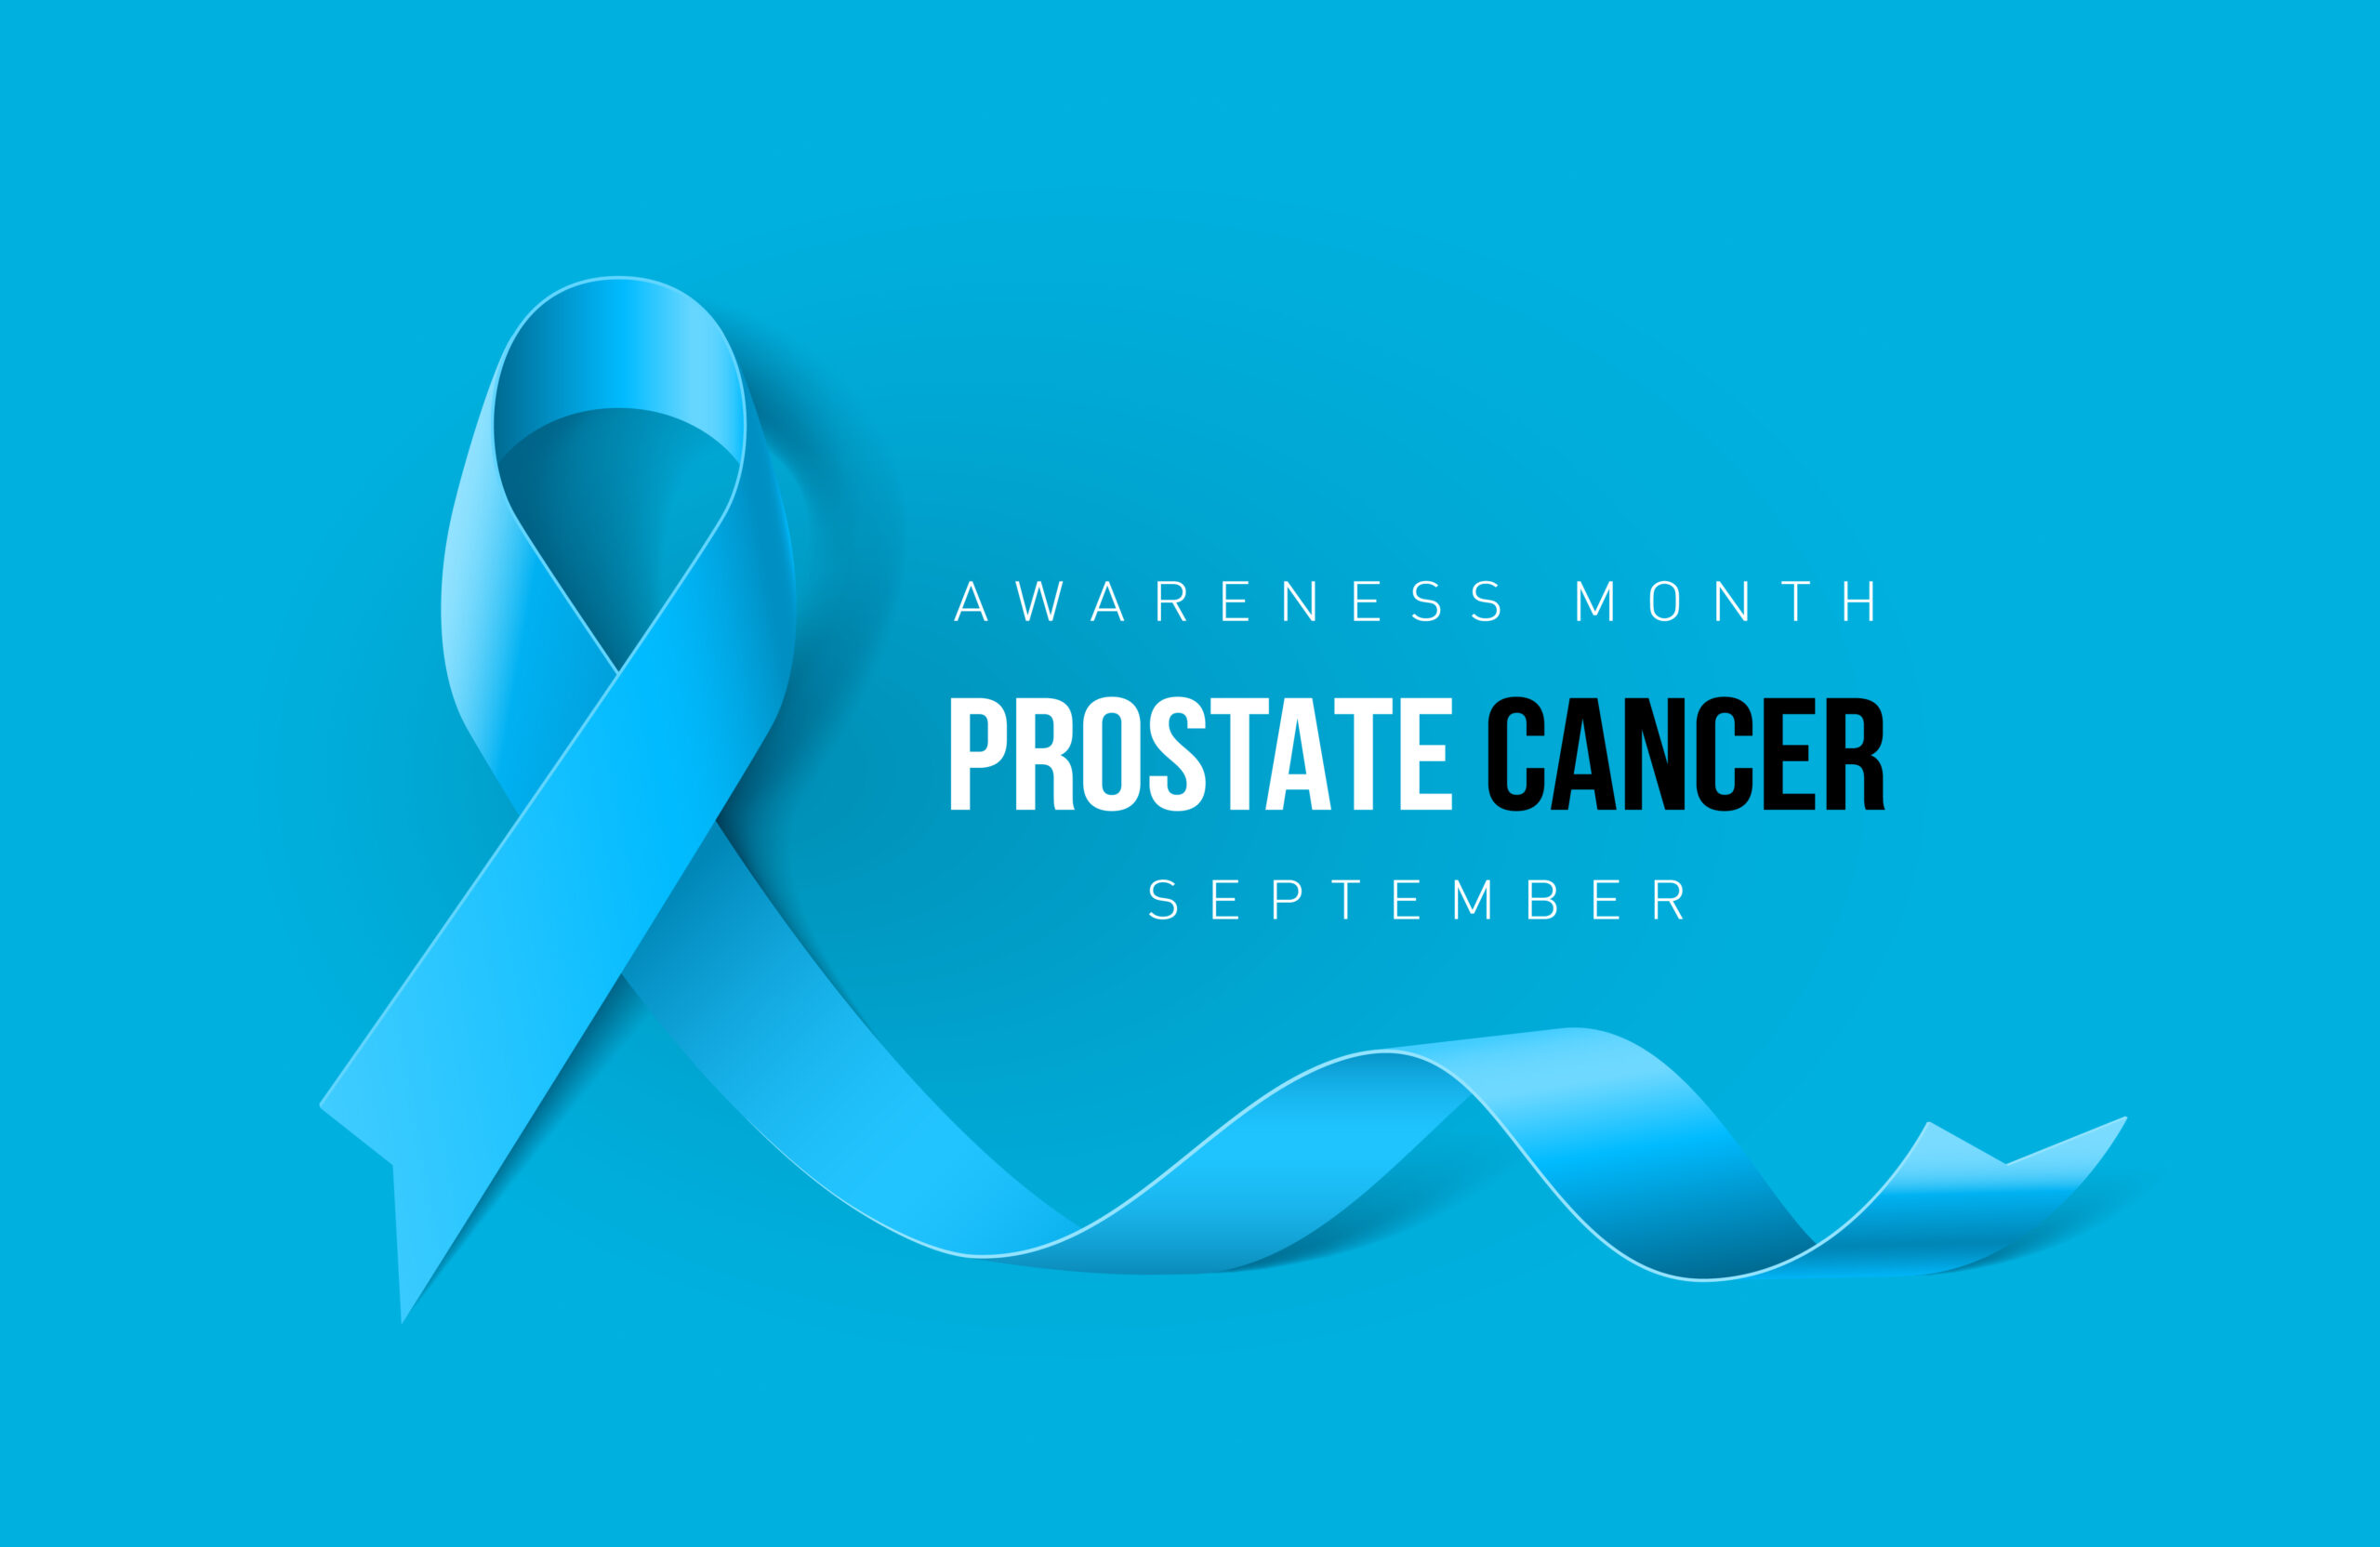  Best Hospital to Treat Prostate Cancer